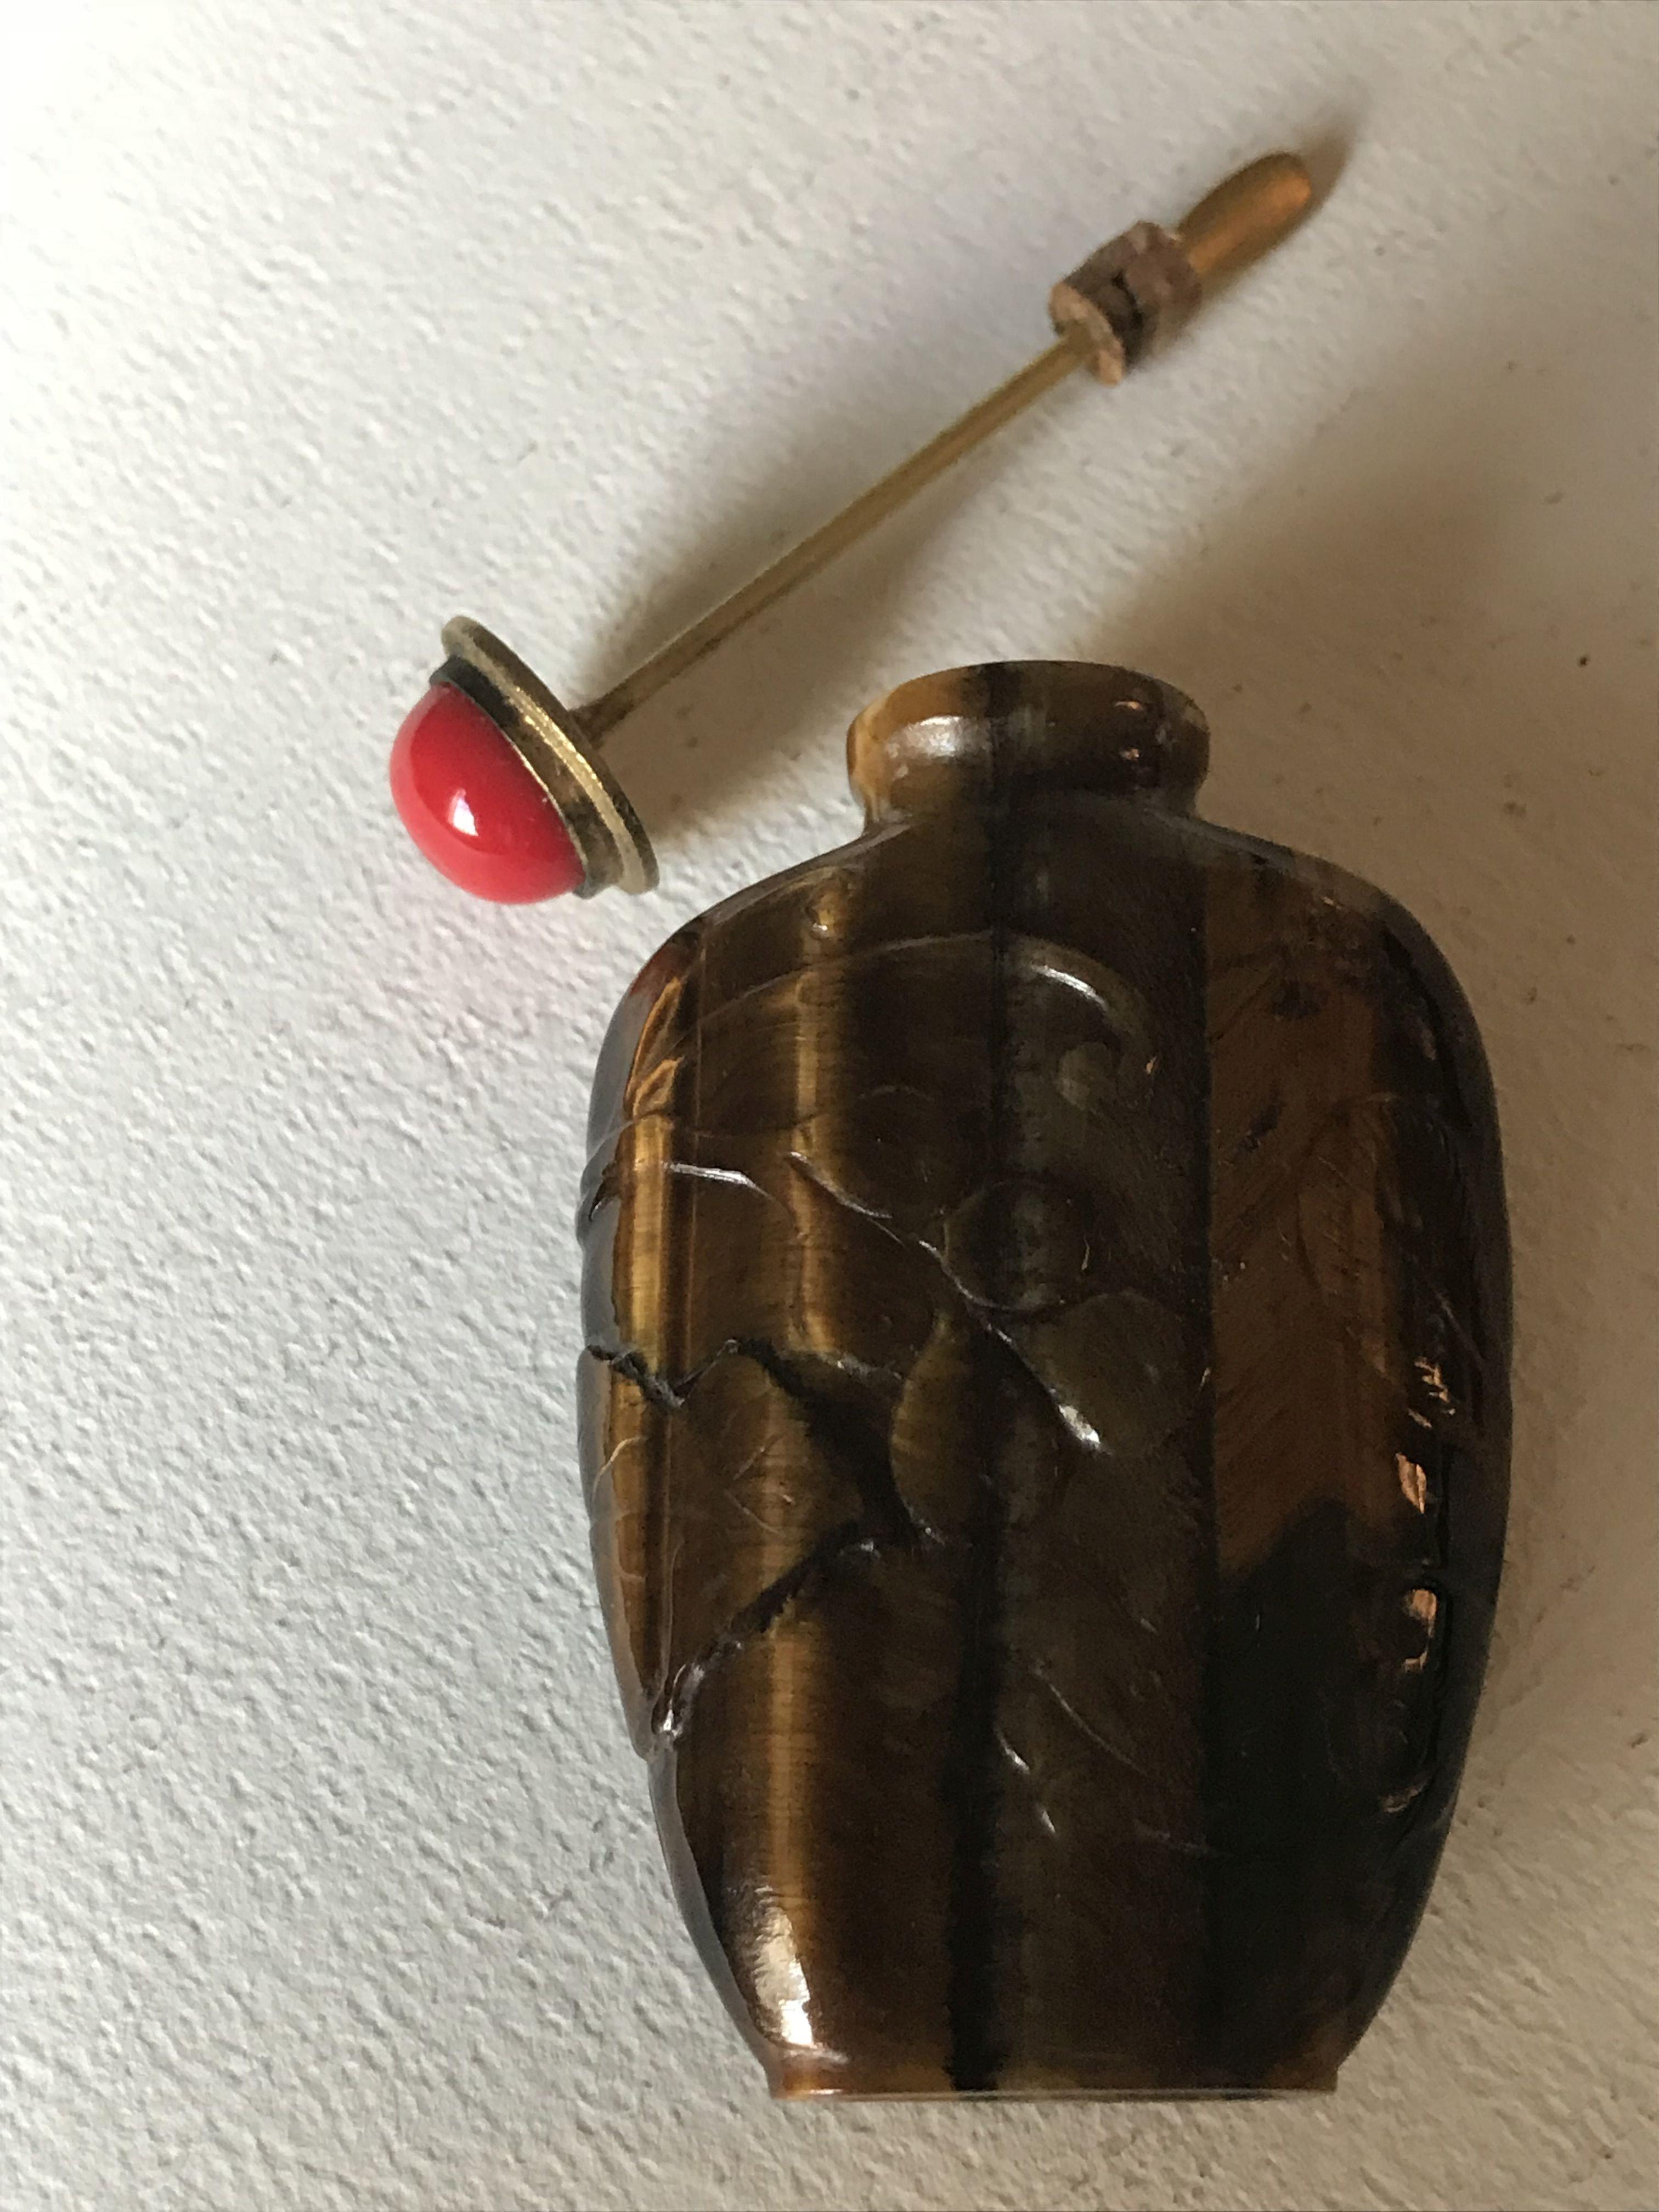 Genuine Tiger Eye gemstone sniffing bottle, hand carved with vine leaflets and grapes on the surface